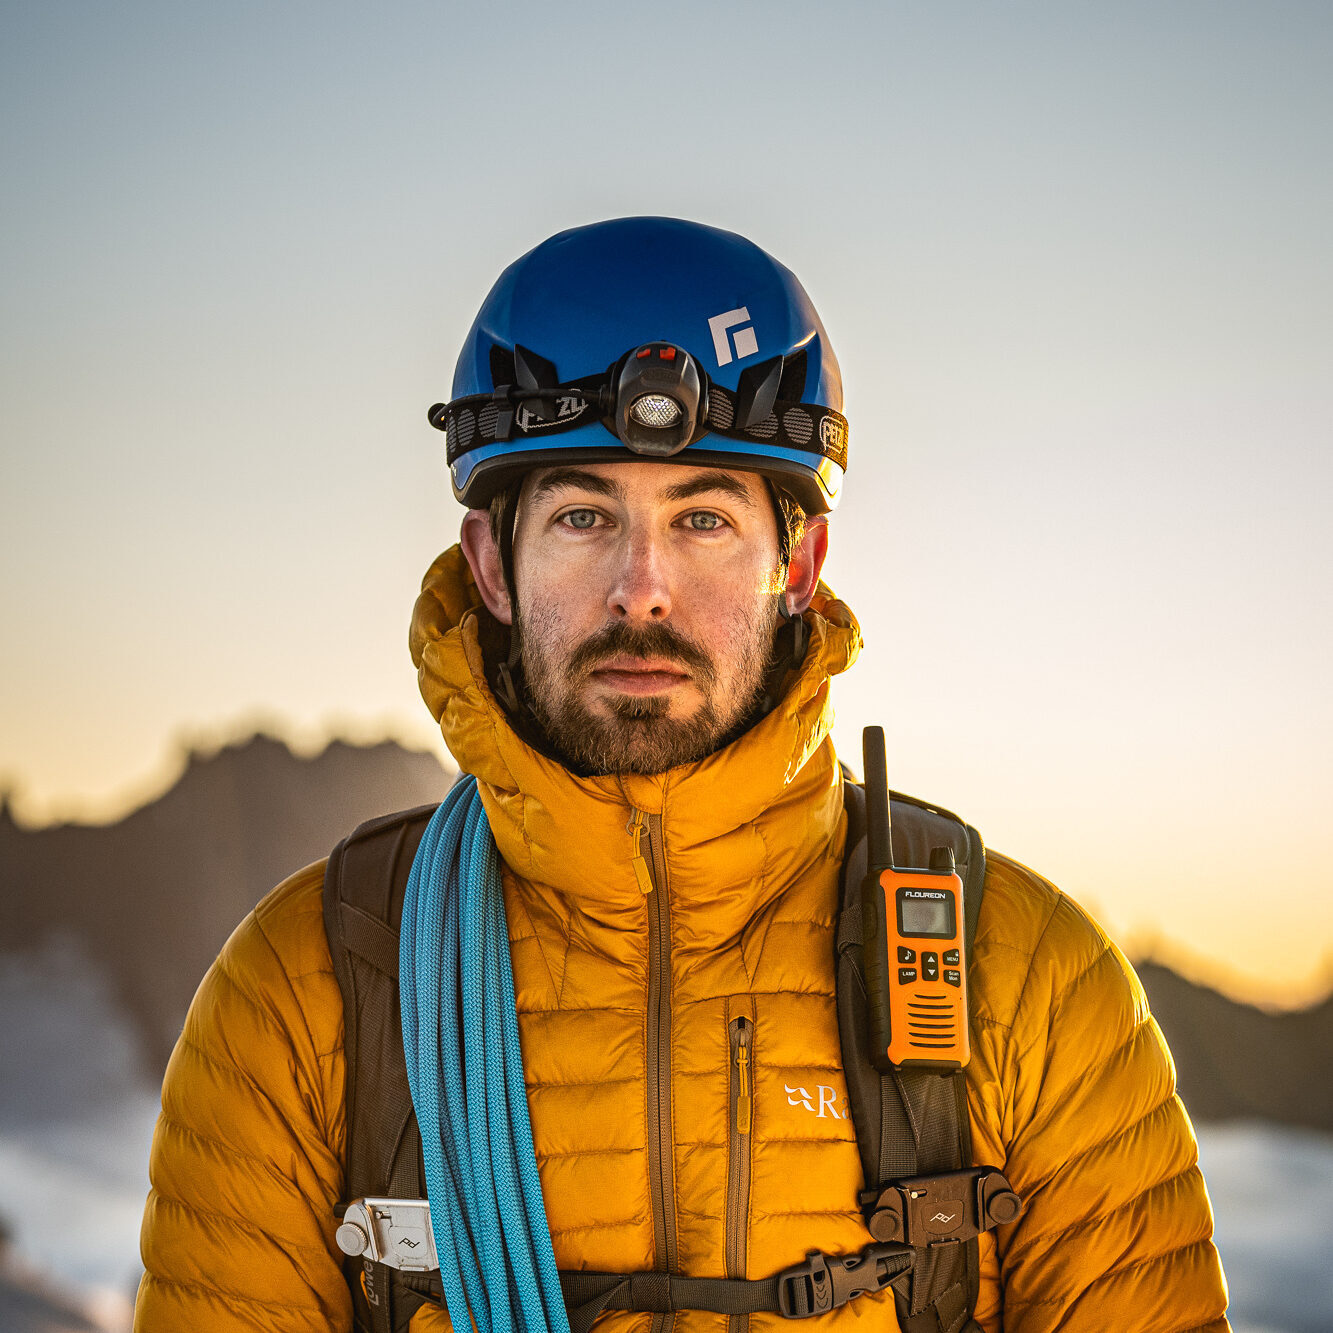 Gear Geeks Show with BBC science presenter and adventurer, Huw James